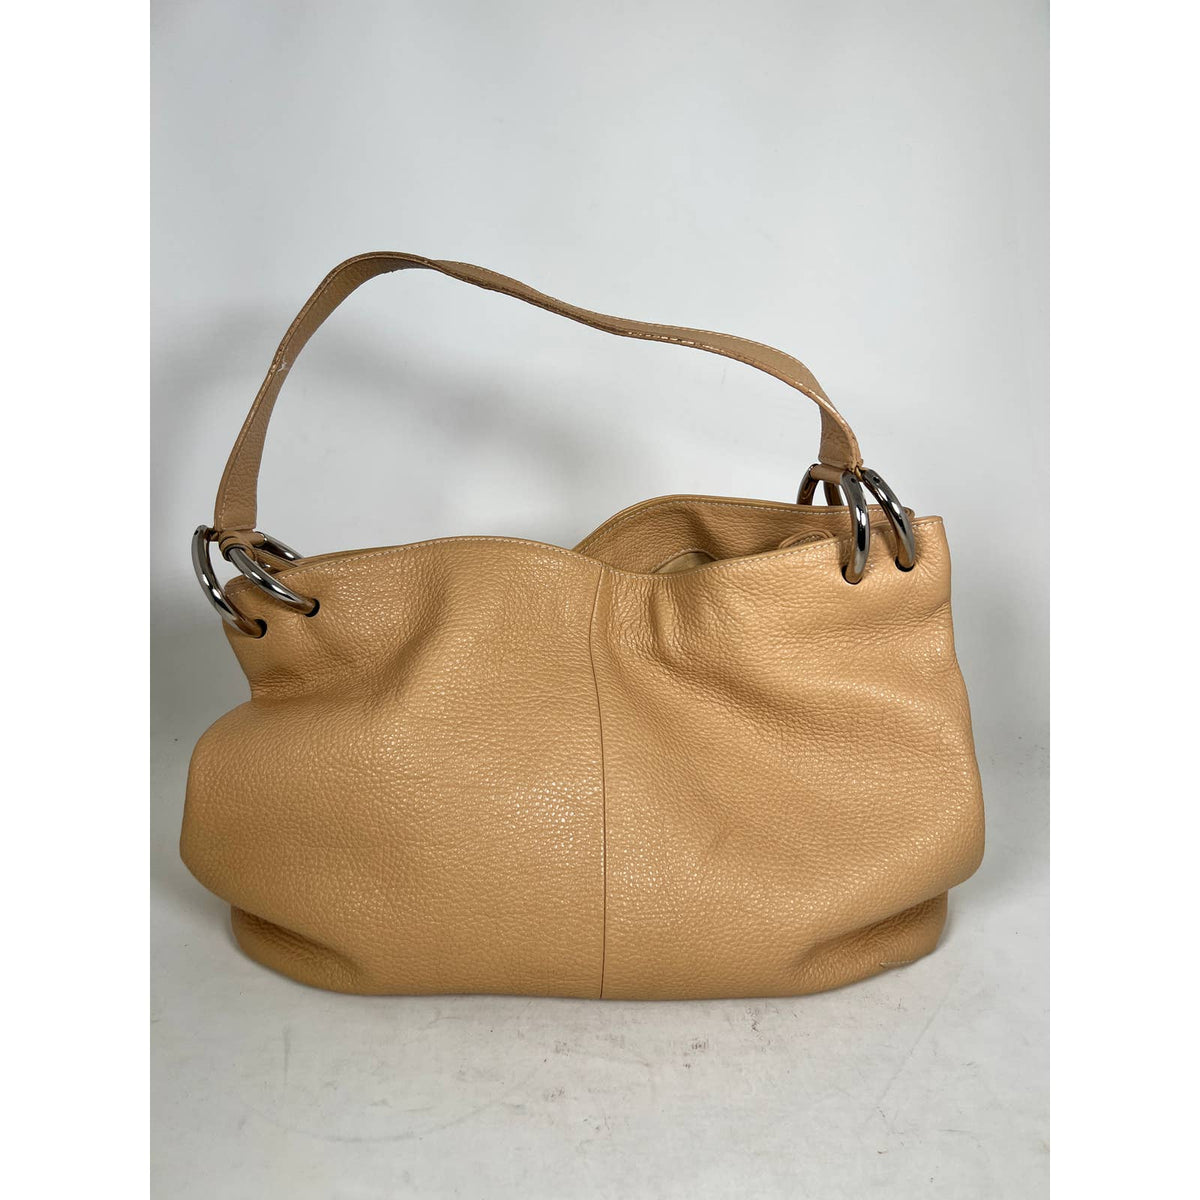 Furla Brown Pebbled Leather Tote Purse